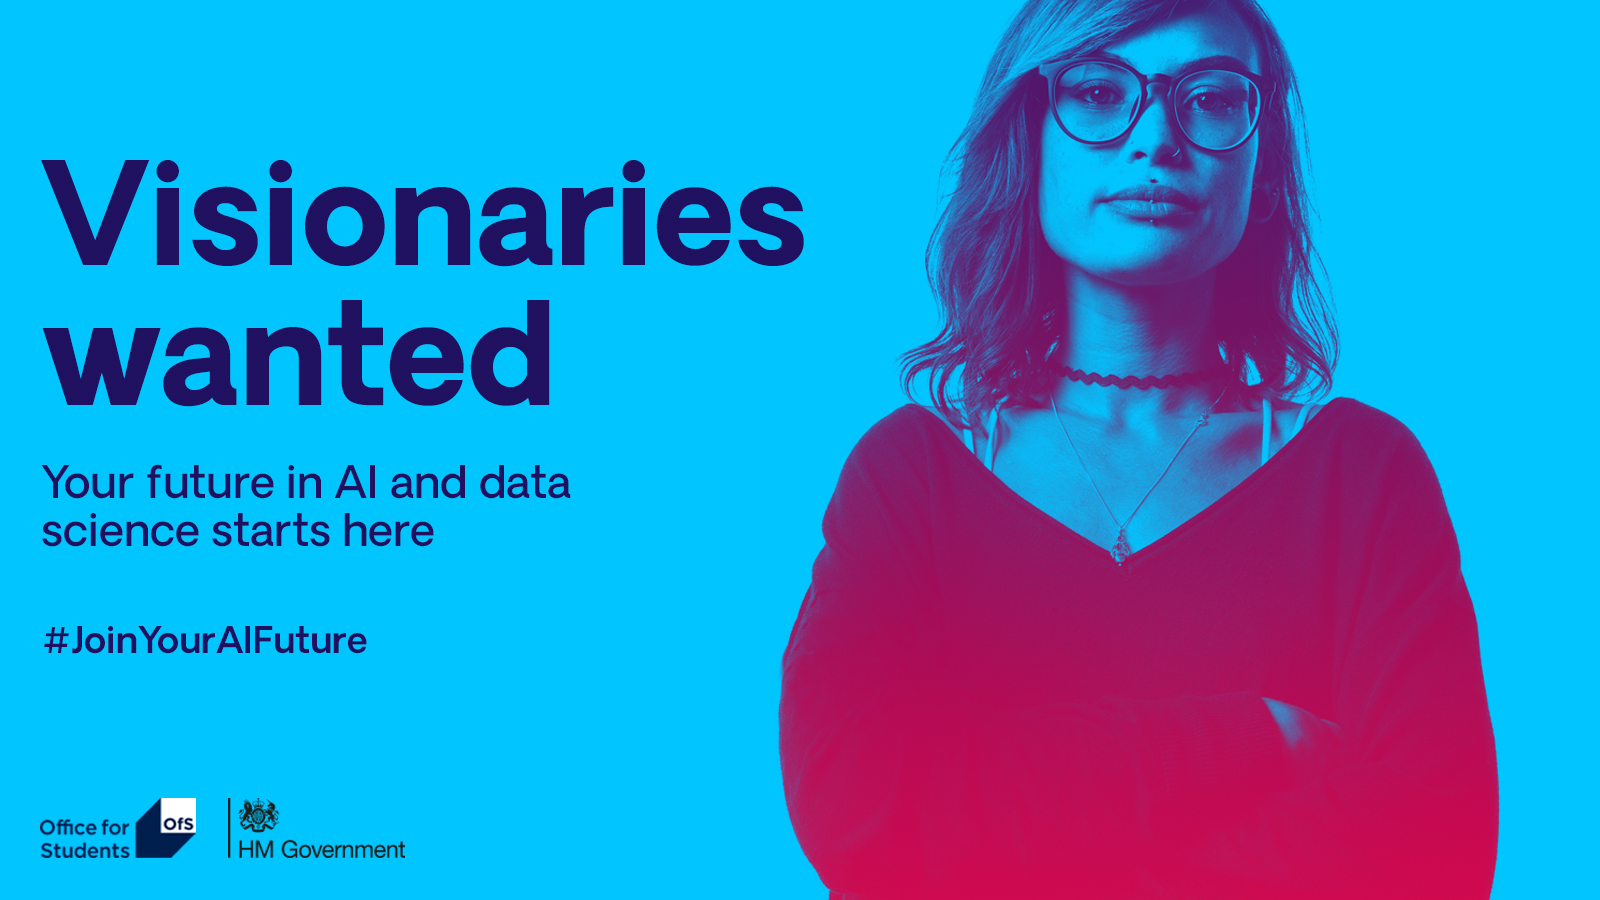 Visionaries wanted: your future in AI and data science starts here #JoinYourAIFuture